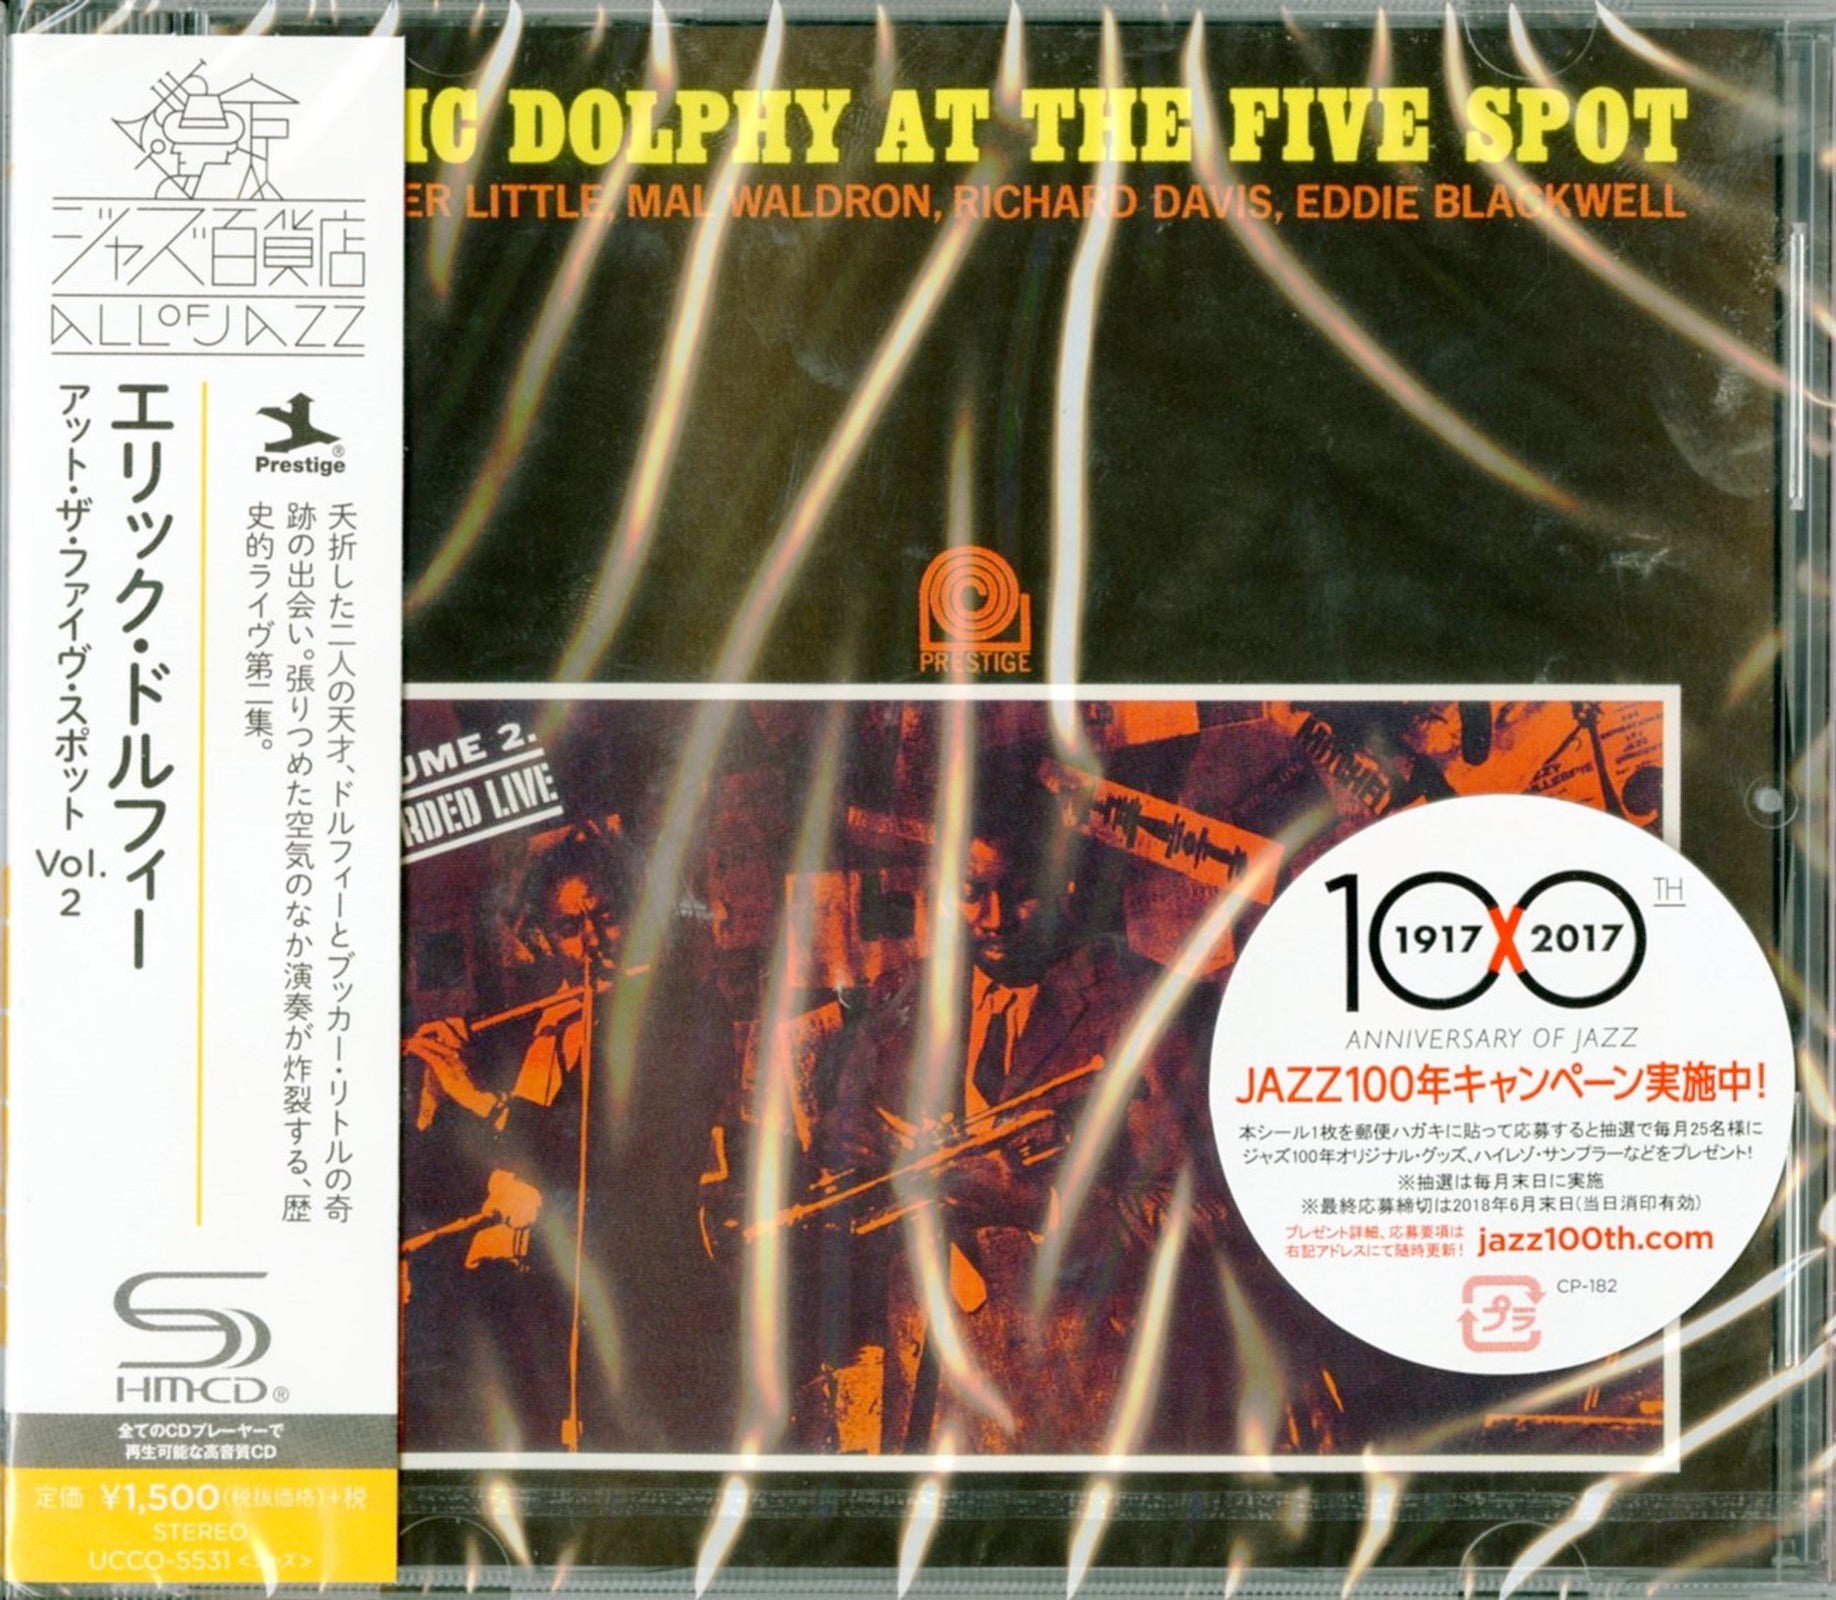 Eric Dolphy Eric Dolphy At The Five Spot. Vol. Japan SHM-CD CDs  Vinyl Japan Store